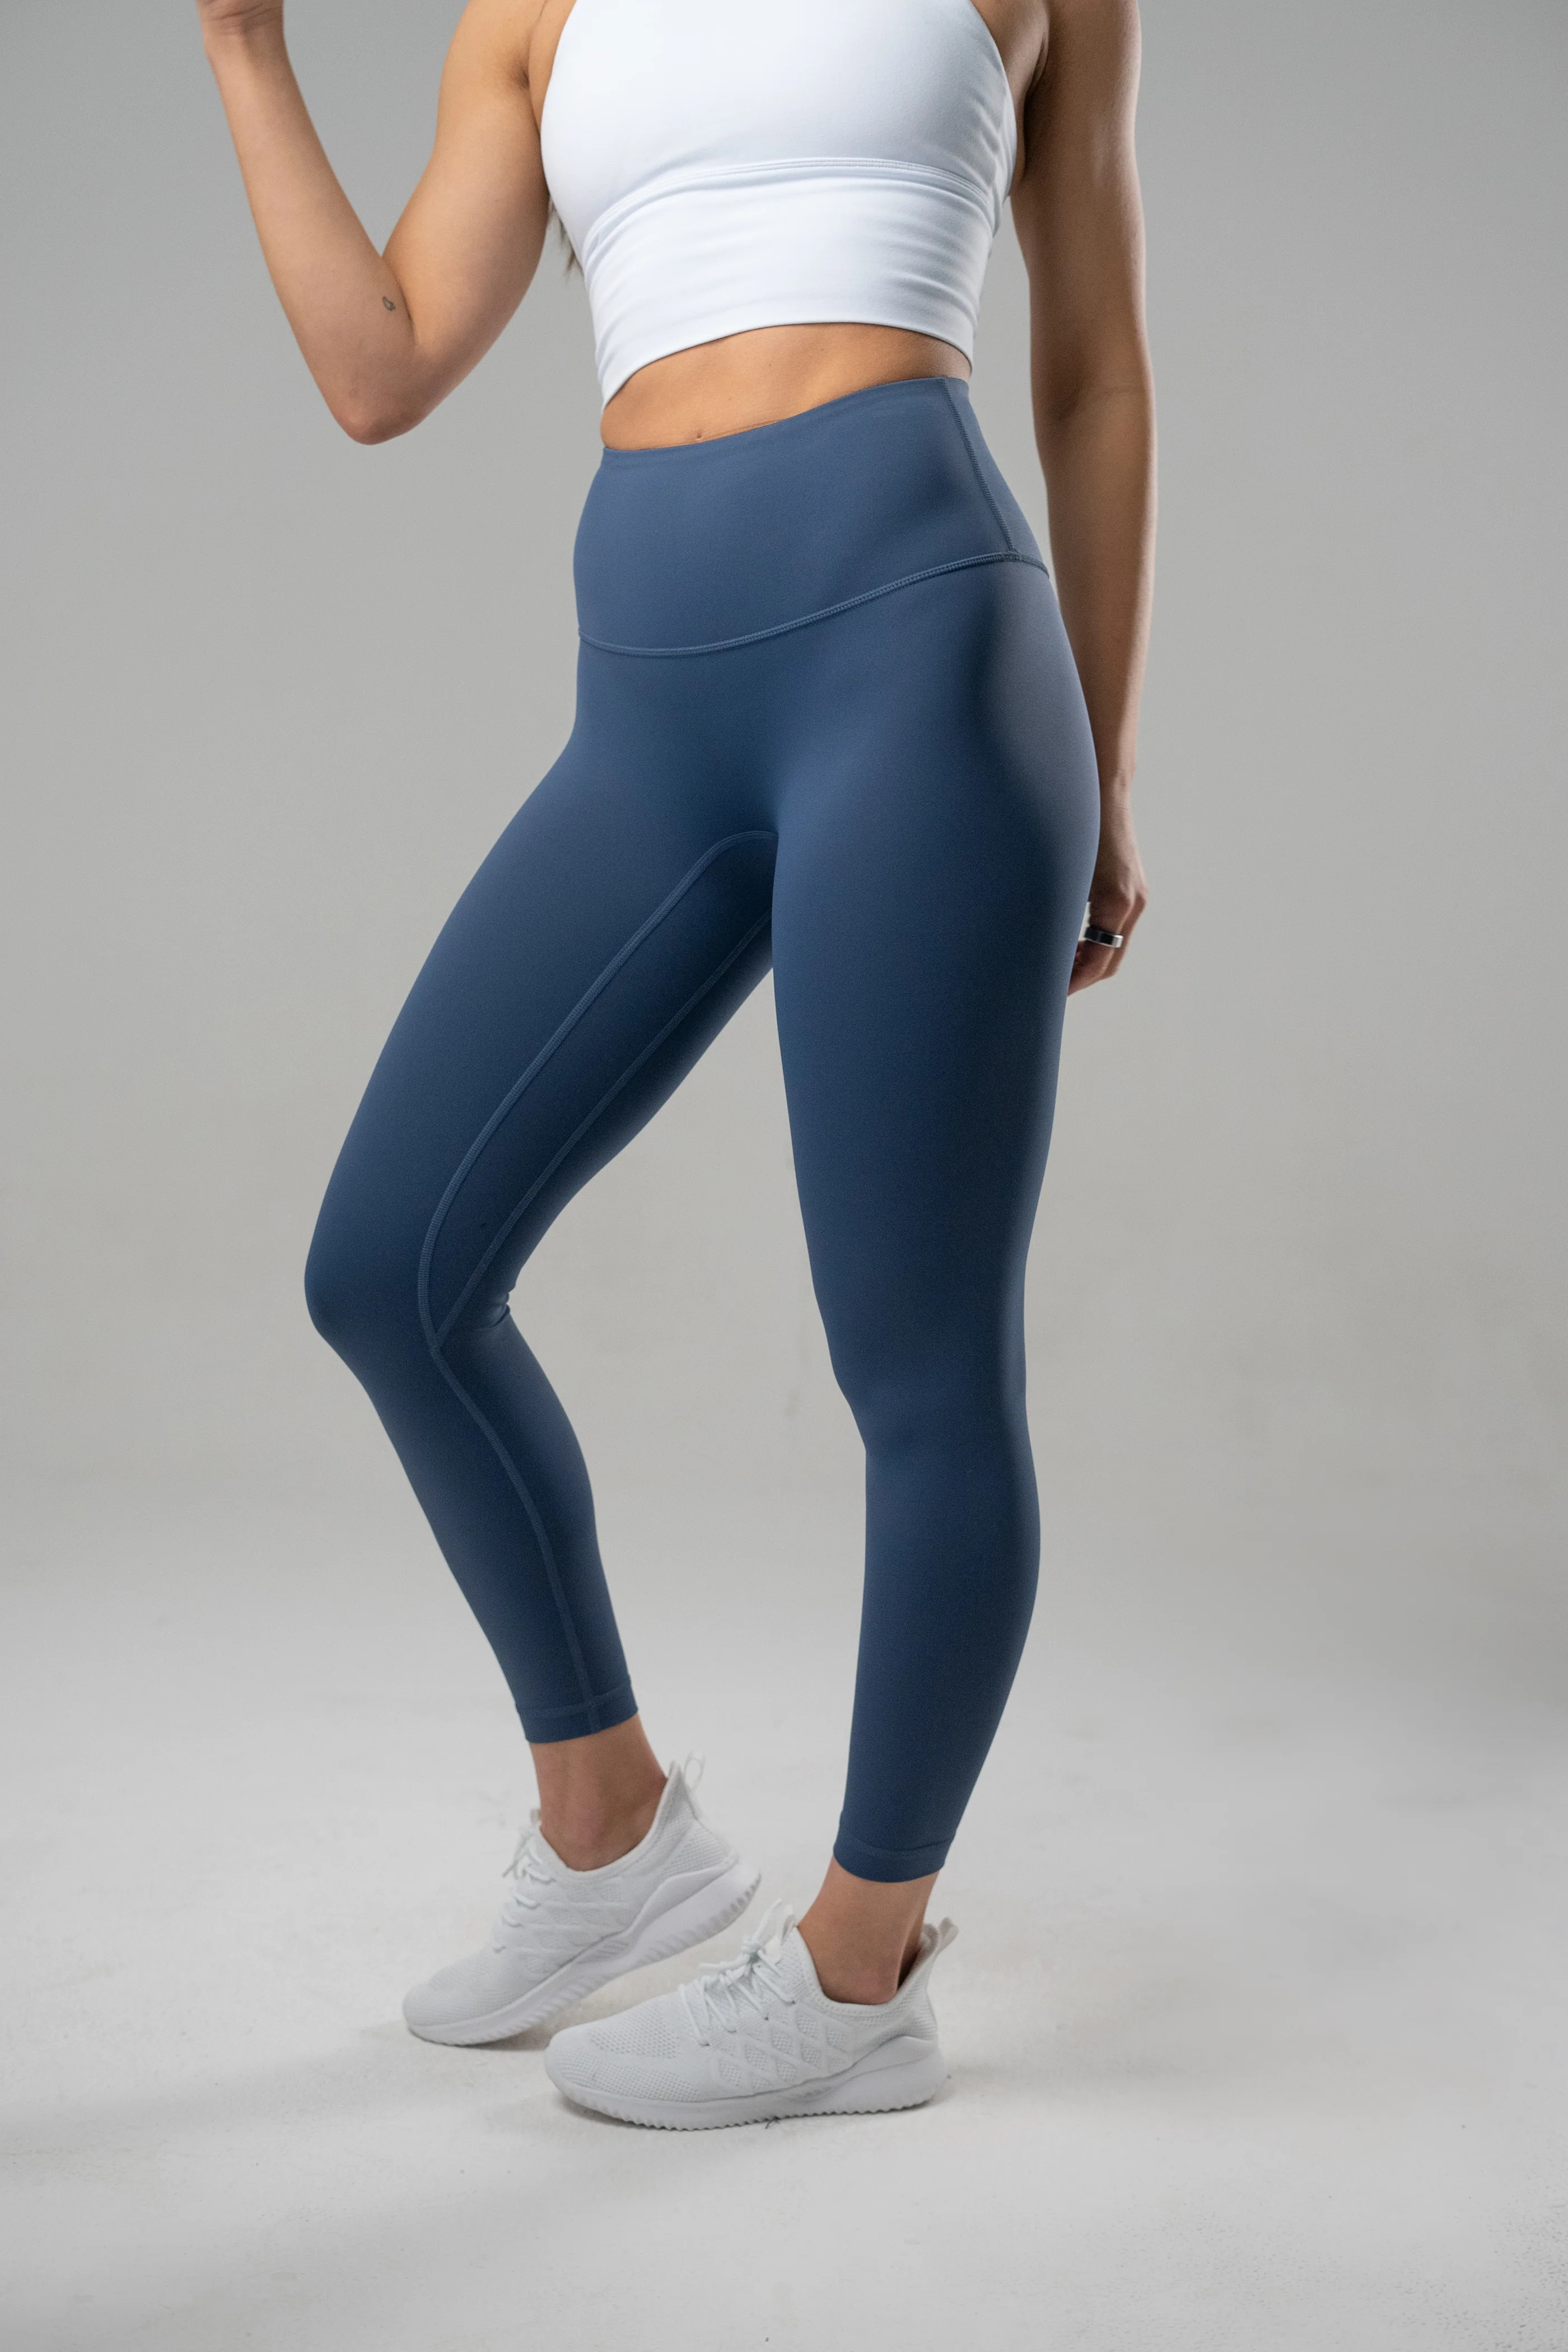 kind-hearted serene high-rise stay-put leggings 25" | Alyth Active